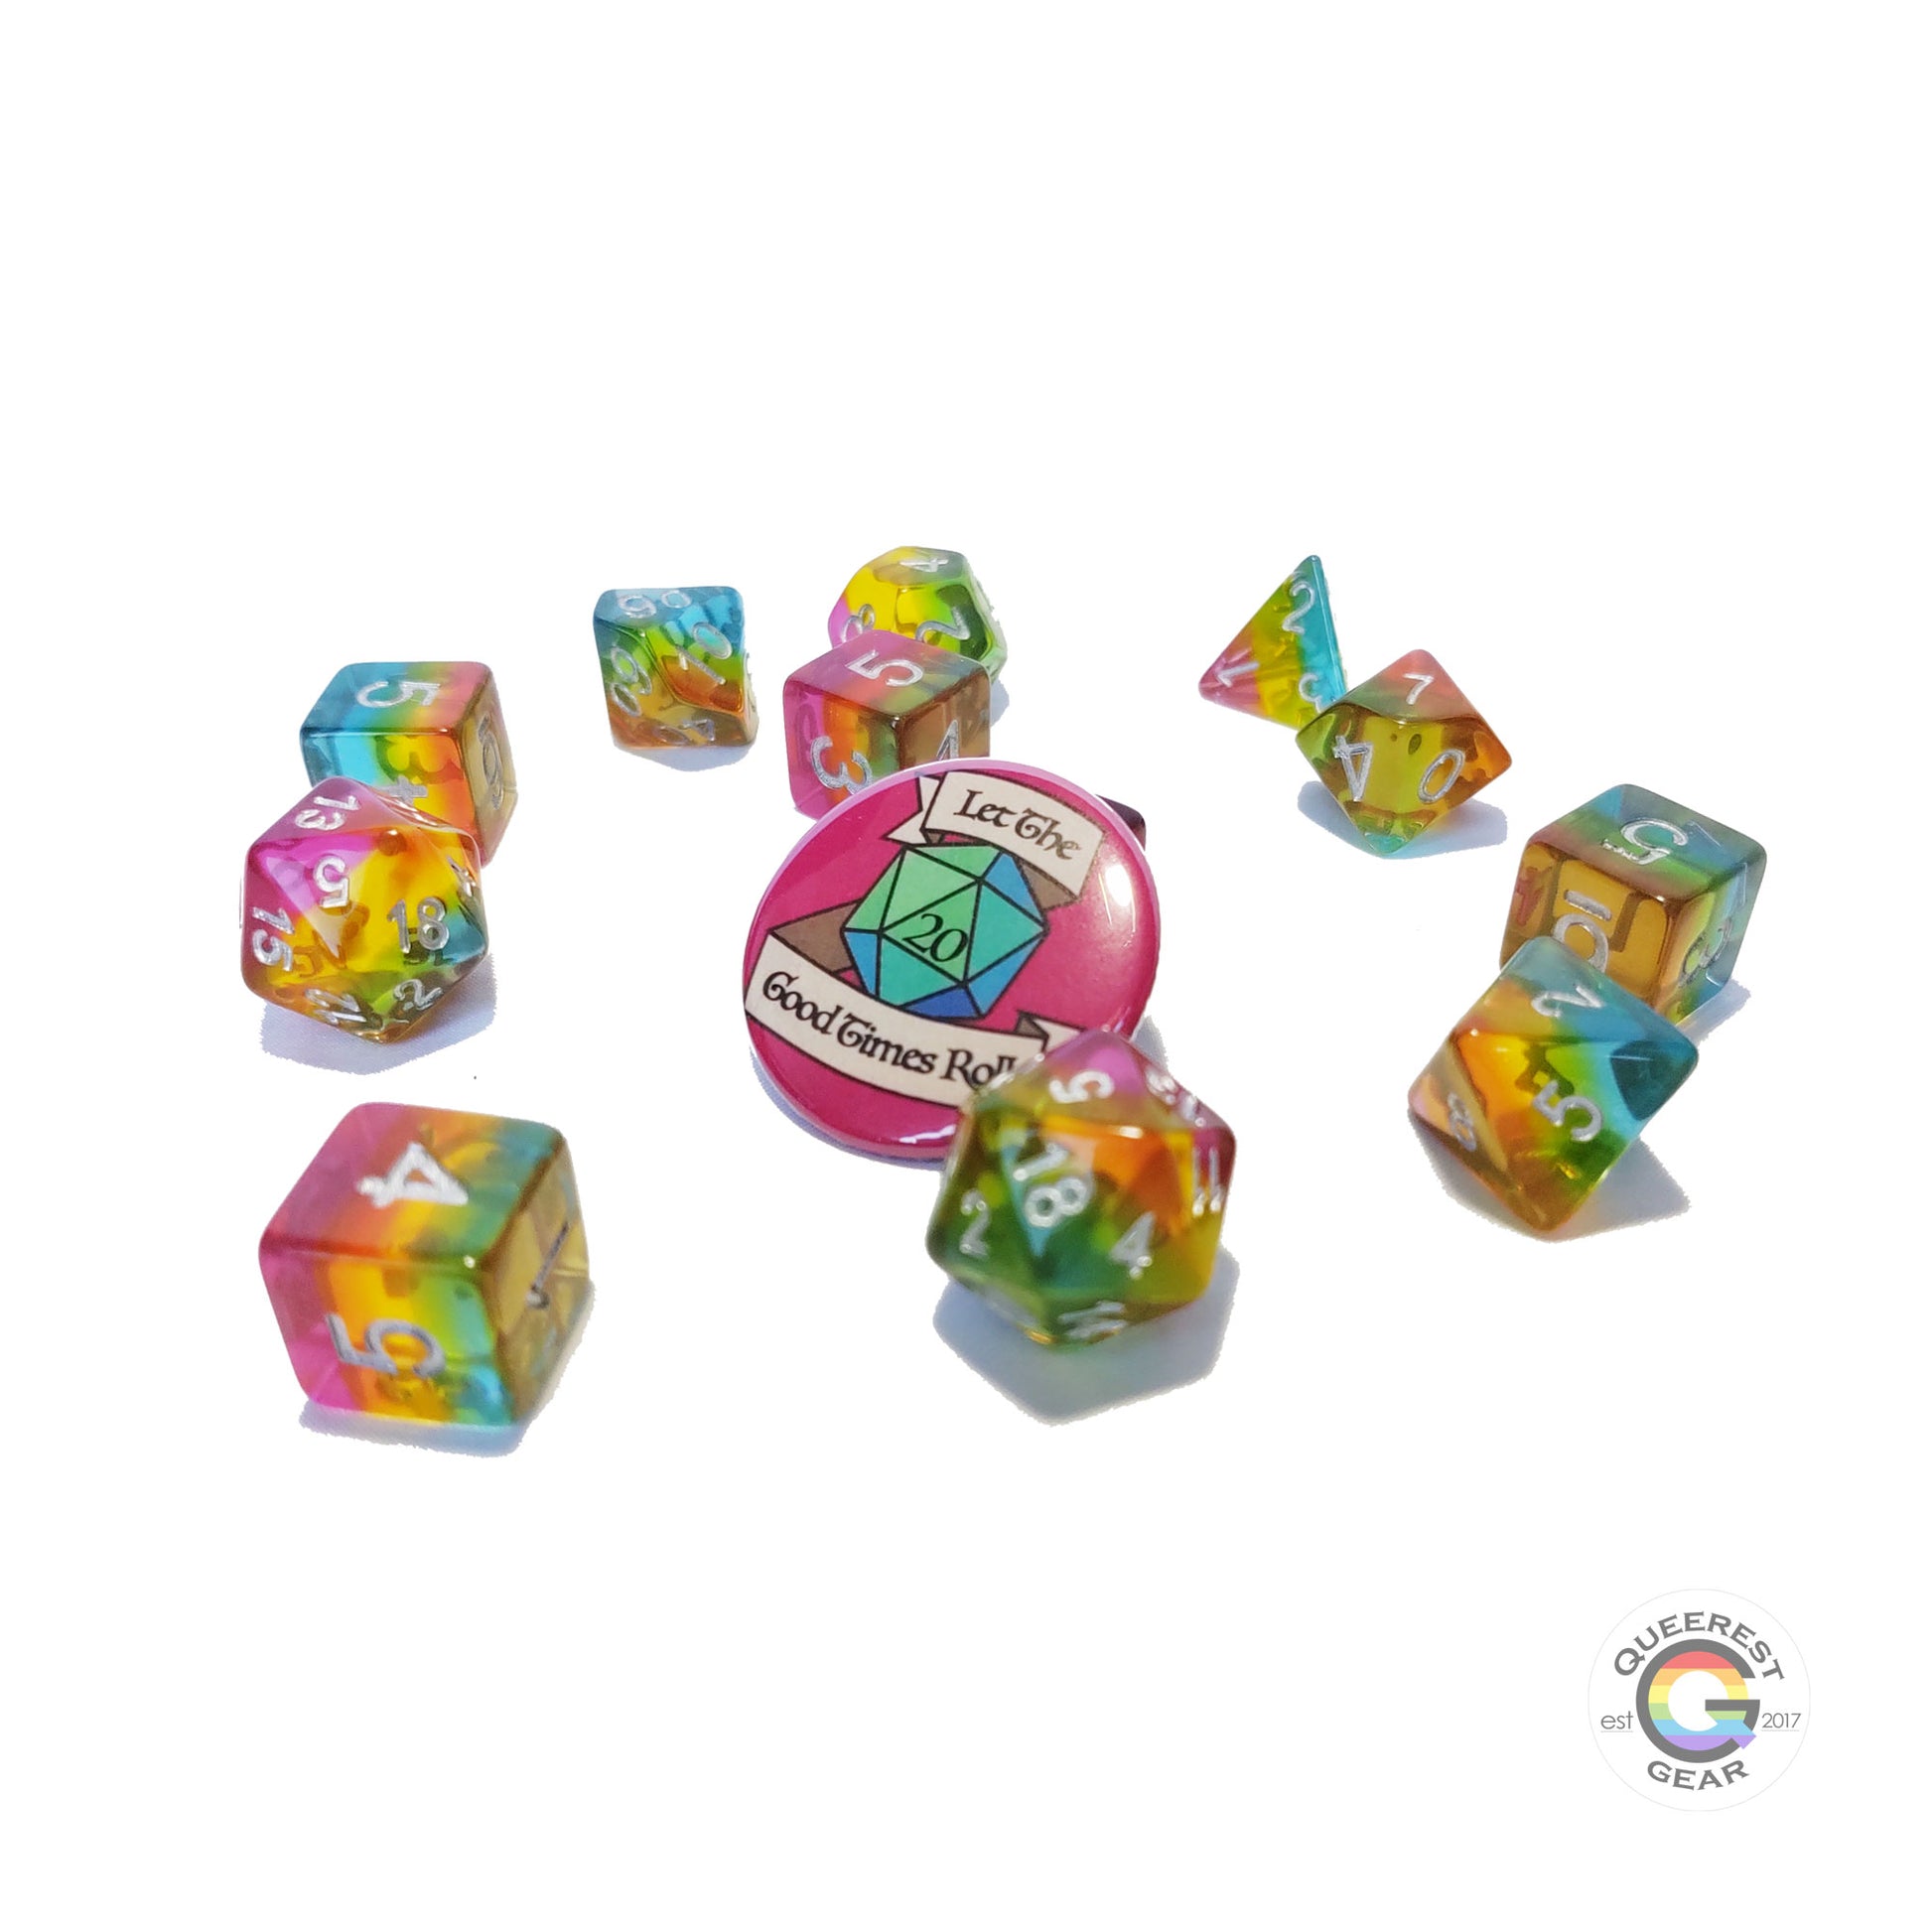 11 piece set of pansexual dice scattered on a white background. They are transparent and colored in the stripes of the nonbinary flag with silver ink. There is the freebie “let the good times roll” pinback button among them. 